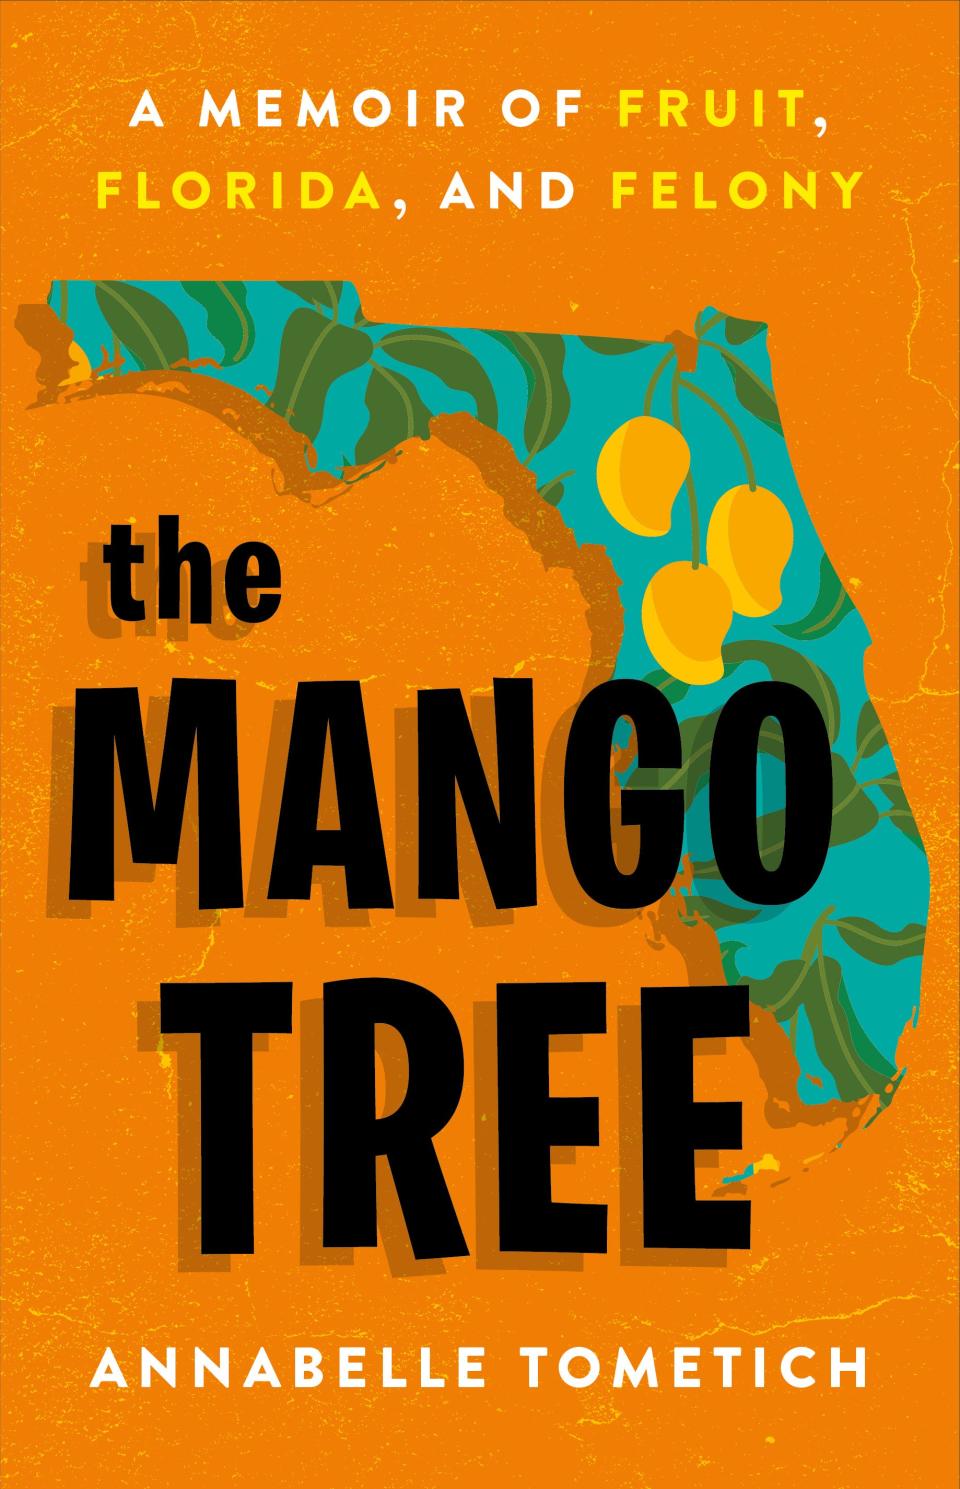 “The Mango Tree: A Memoir of Fruit, Florida, and Felony," due out in April 2024, is the first book by Annabelle Tometich, a Fort Myers native and former food, restaurant and dining journalist with The News-Press.